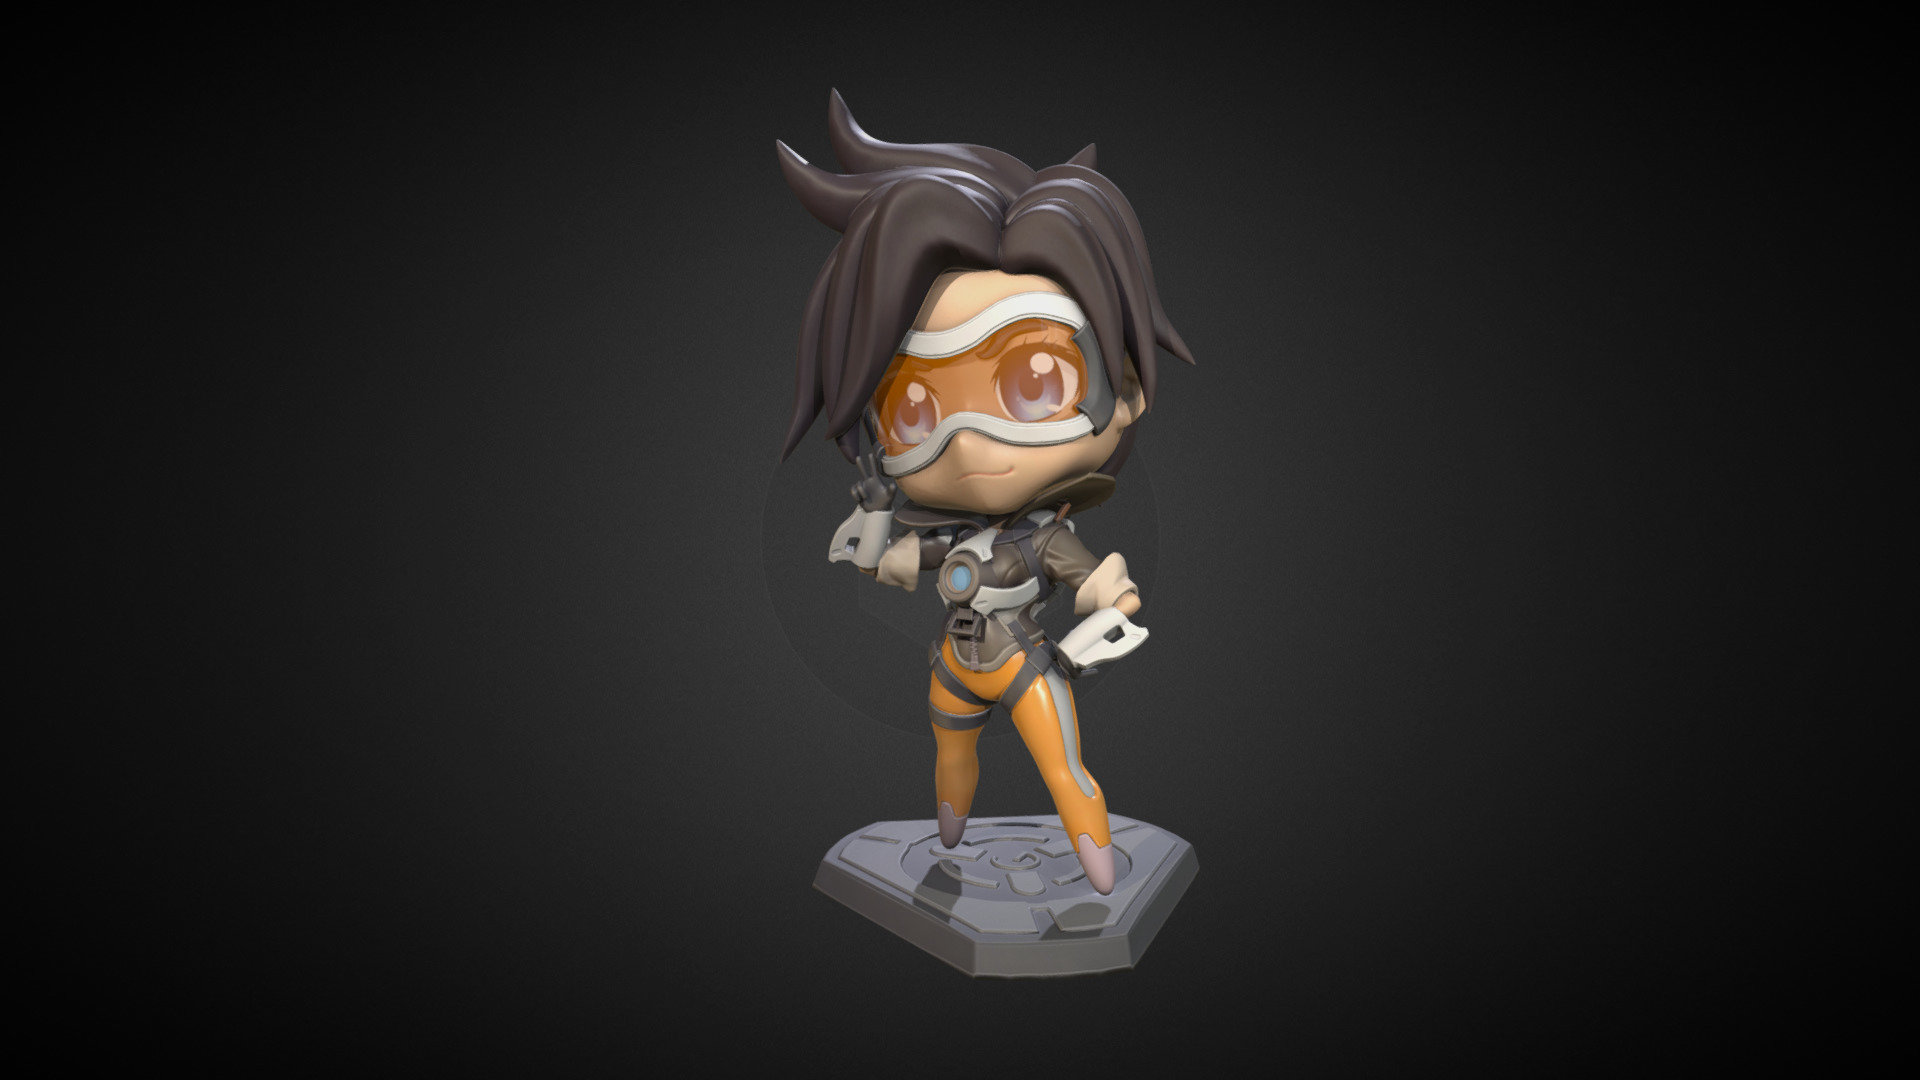 This is my 3d interpretation of Tracer cute graffiti from Overwatch. Blizzard inspire me for a long time, so I decided to make this nendoroid style figure and than present it in sketchfab with PBR workflow. It was very experimental project for me. Hope you like it!

If you want to see keyshot renders, fiil free to check my artstation page
https://www.artstation.com/artwork/QB6Vr - Chibi Tracer - 3D model by john_medved 3d model